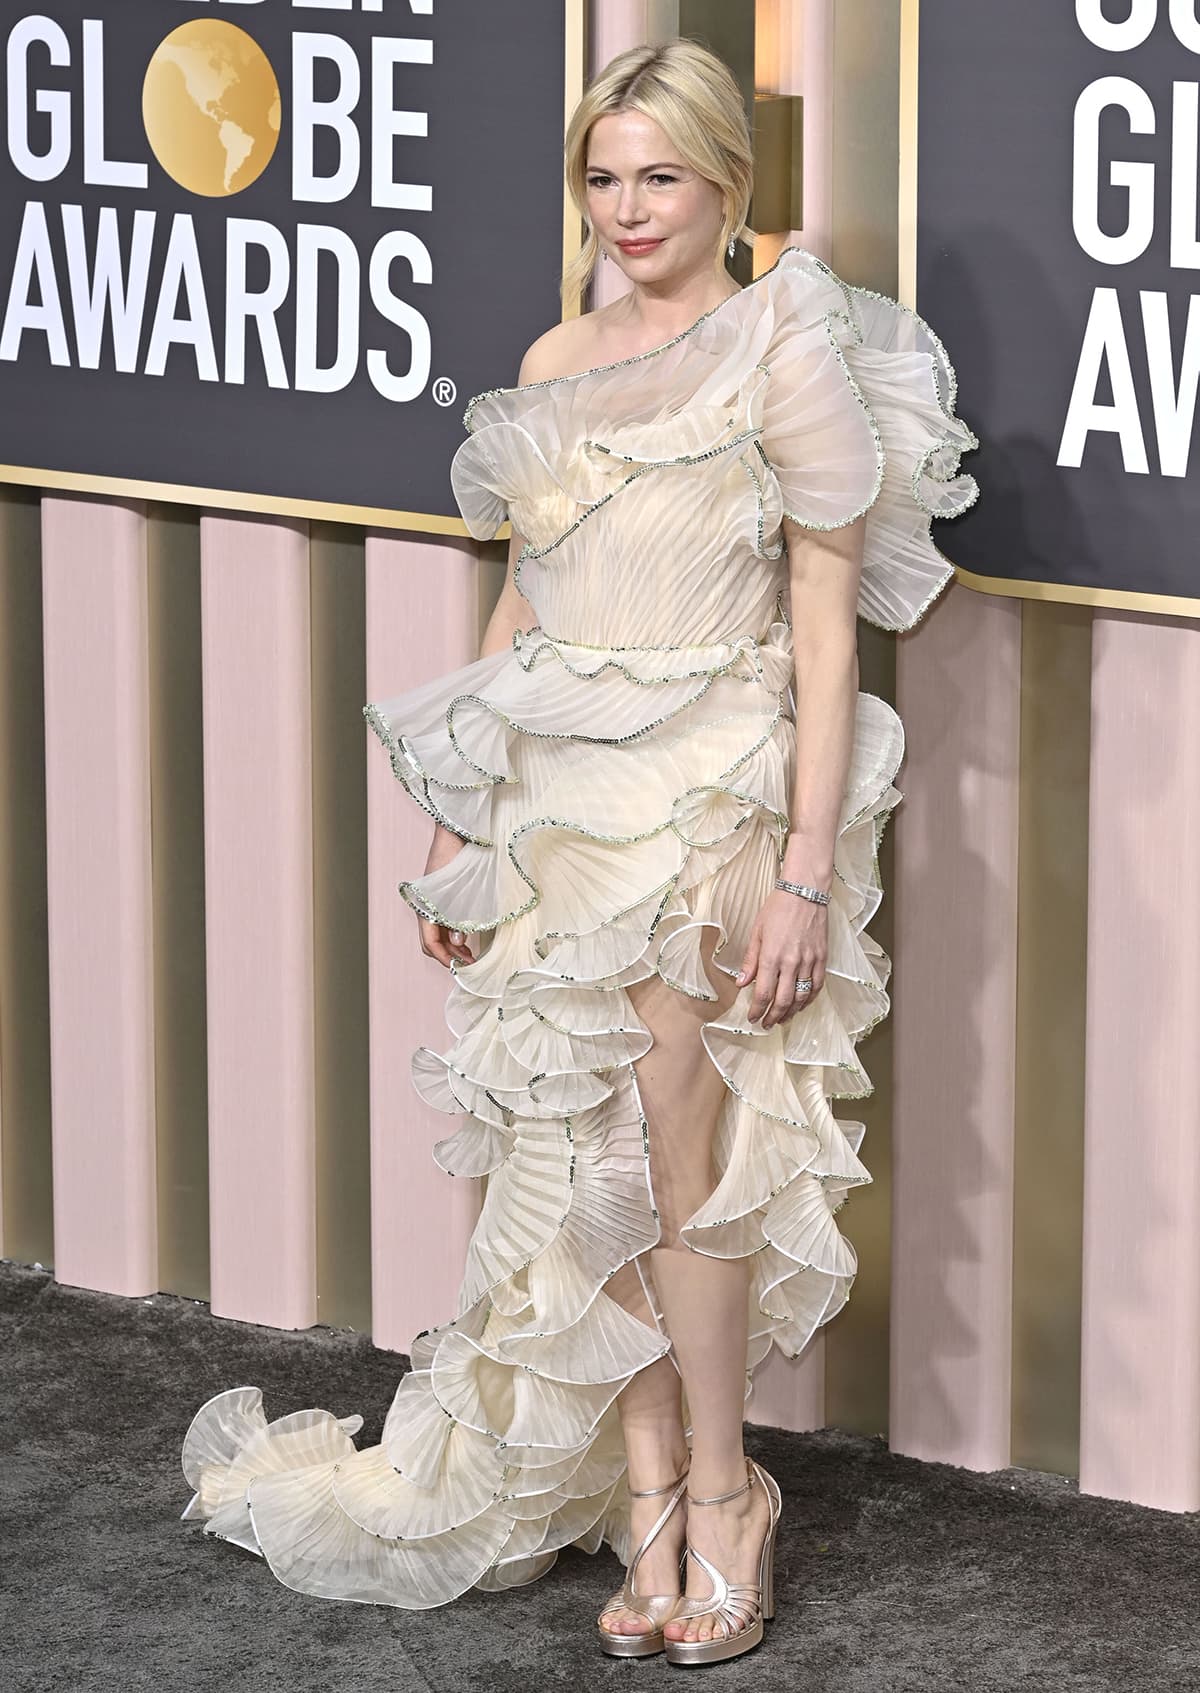 Michelle Williams highlights her flawless complexion in Gucci's pale yellow ruffled gown and platform heels